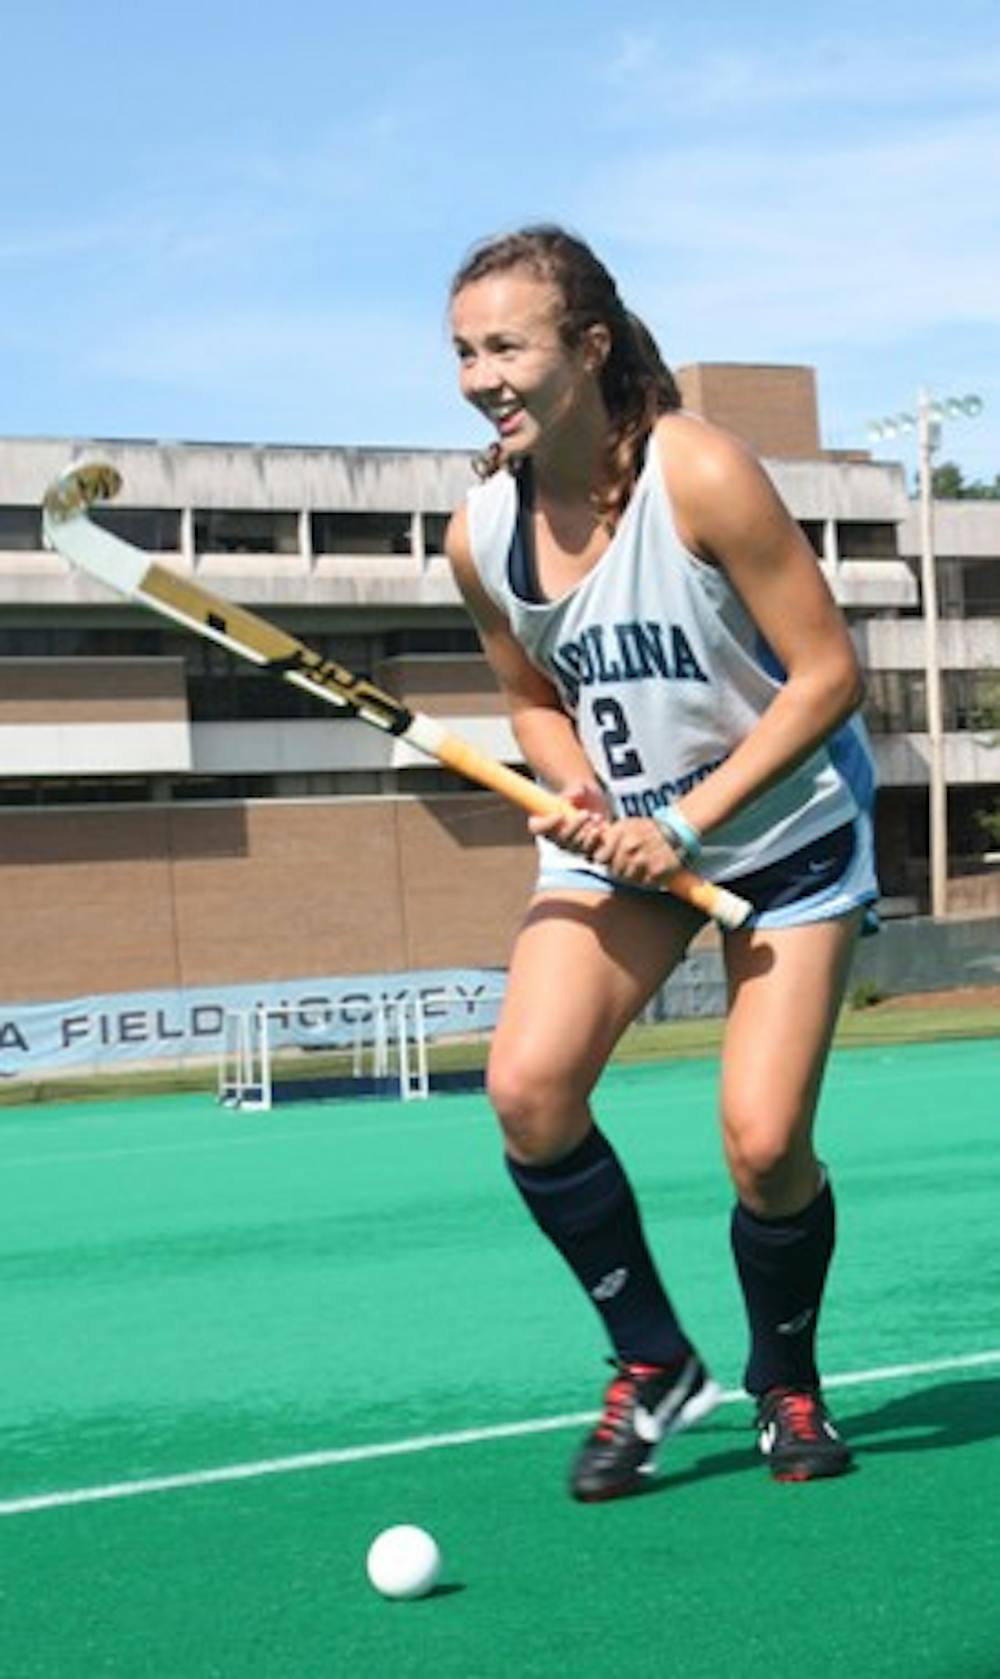 Loren Shealy is a Robertson Scholar field hockey player who is going to Duke in the spring but will still play for UNC. She said that the team is really exciting about their game against Duke tomorrow. "I'm excited to take classes there in the spring- it's a great university- and we are big rivals but when I hit the field it's all Carolina," Loren said. "It will be a great learning experience," she said. 